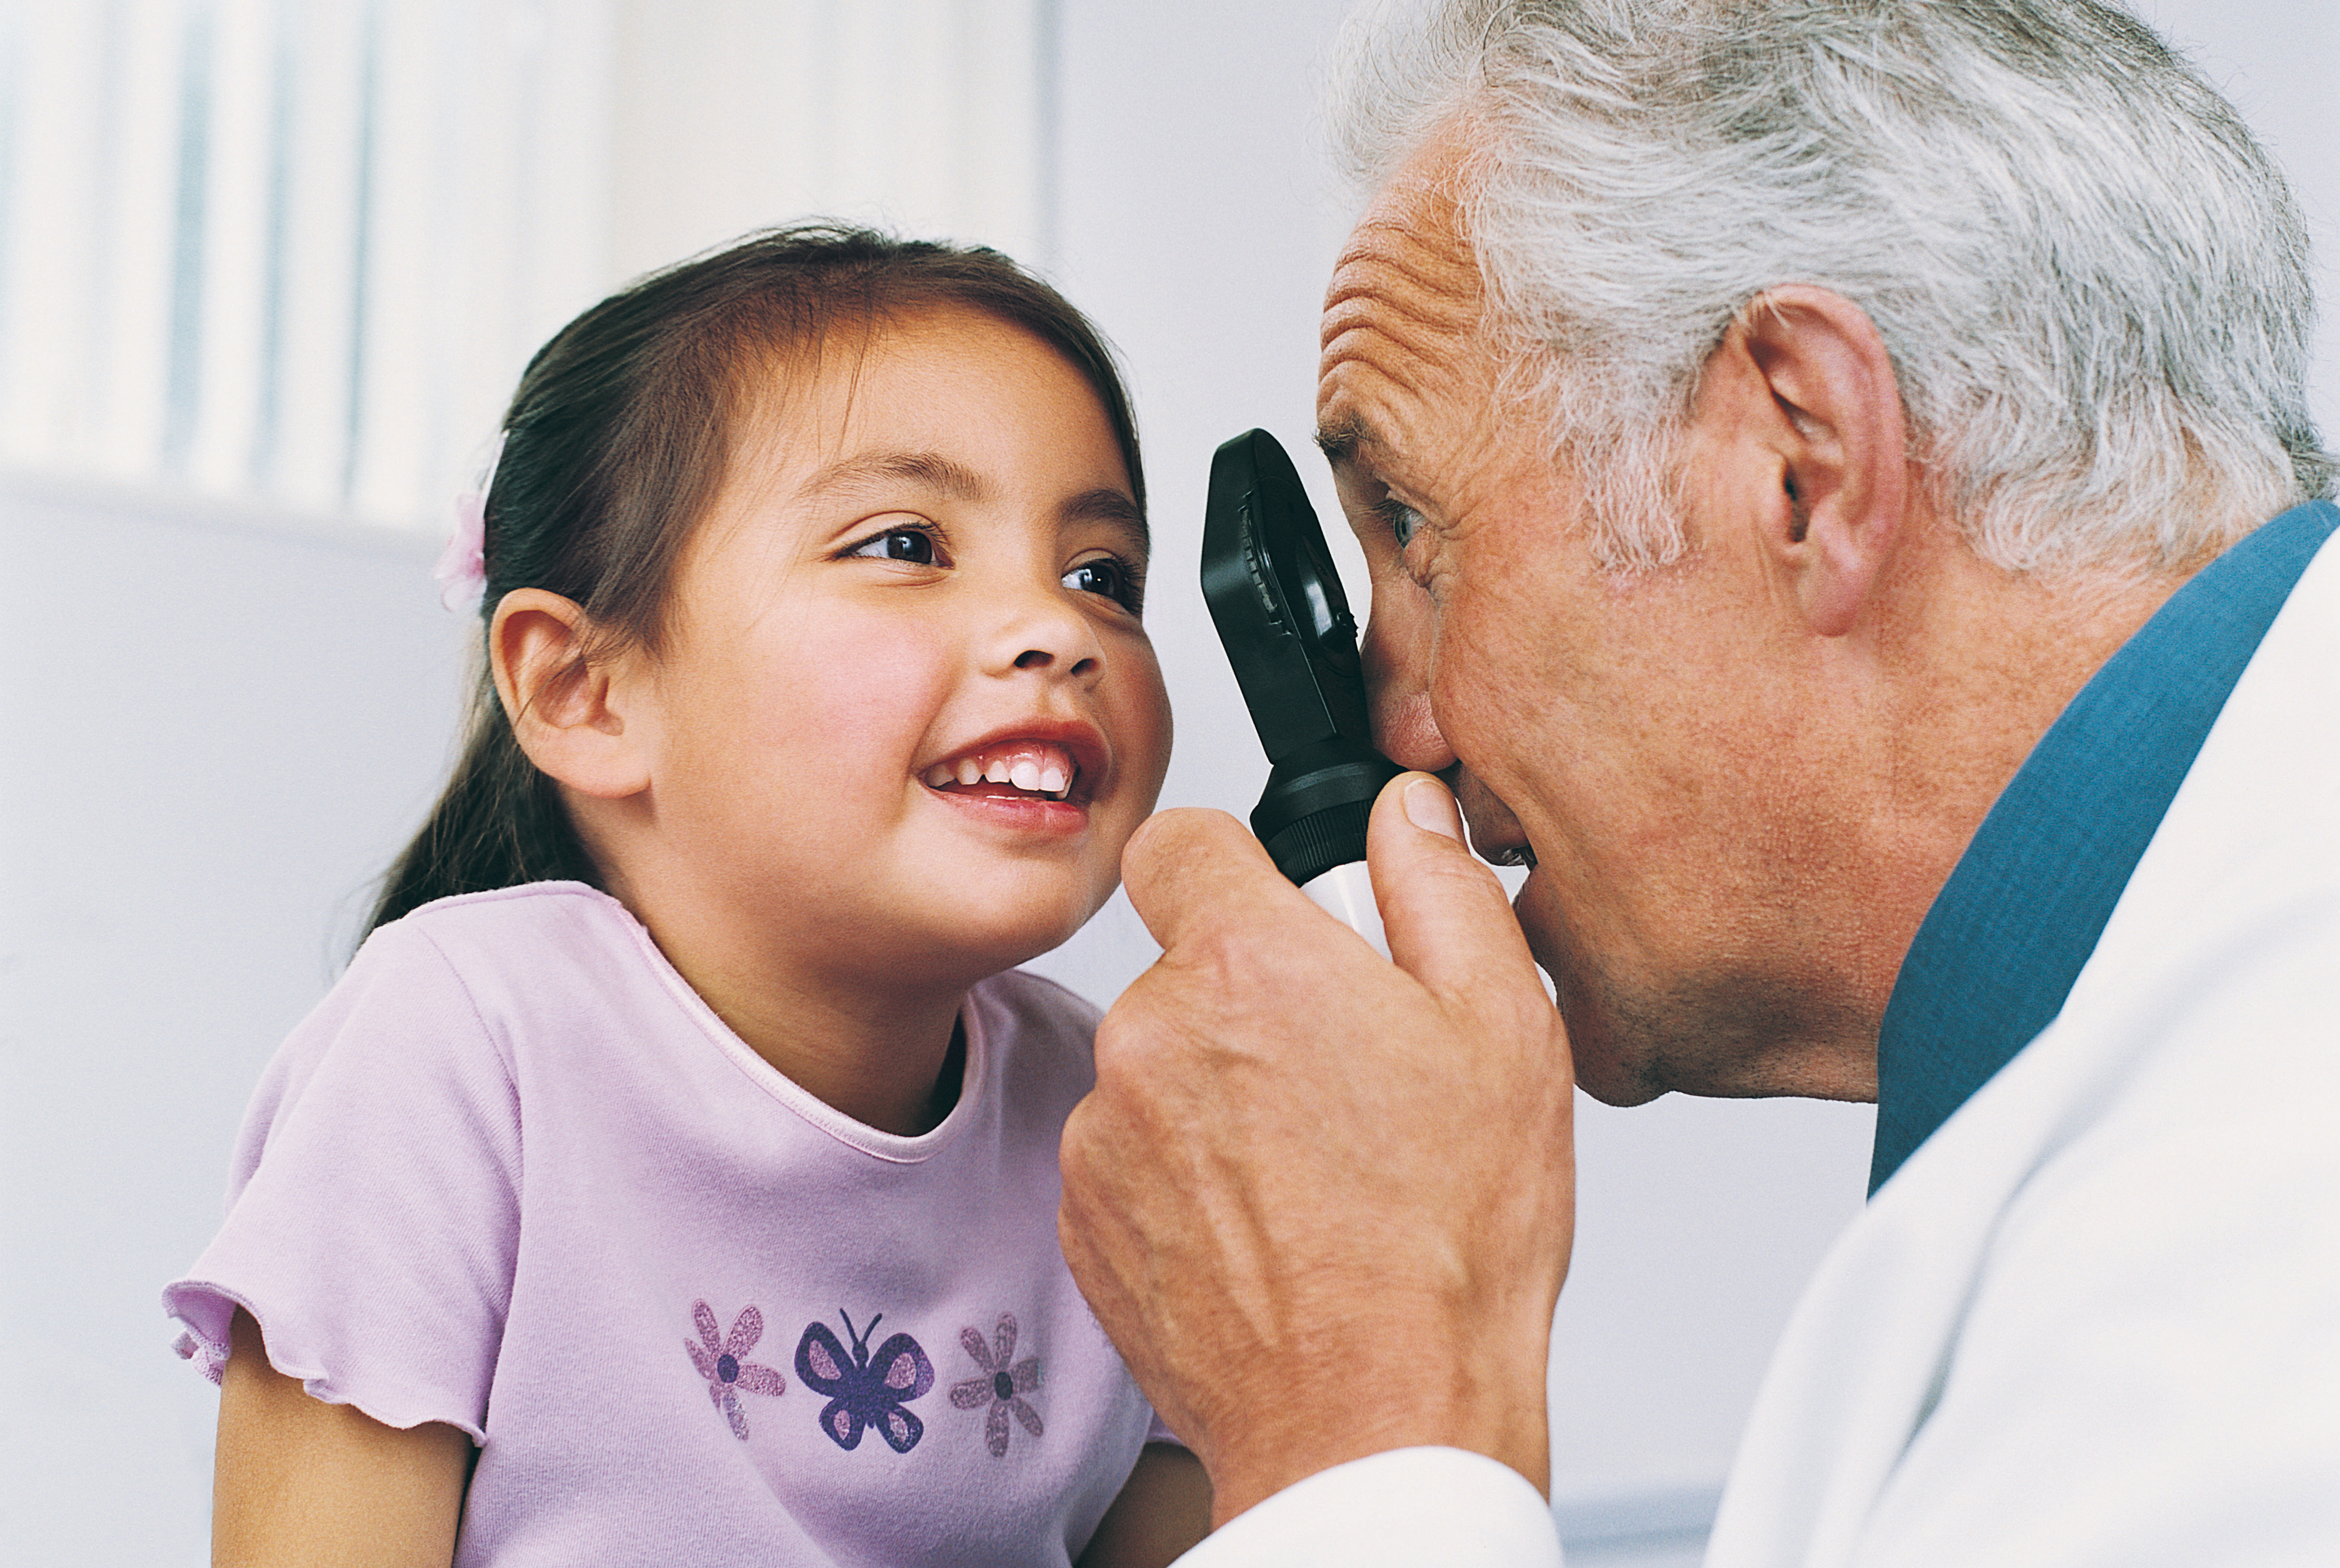 Make the Most of Your Child’s Visit to the Doctor (Ages 1 to 4) 